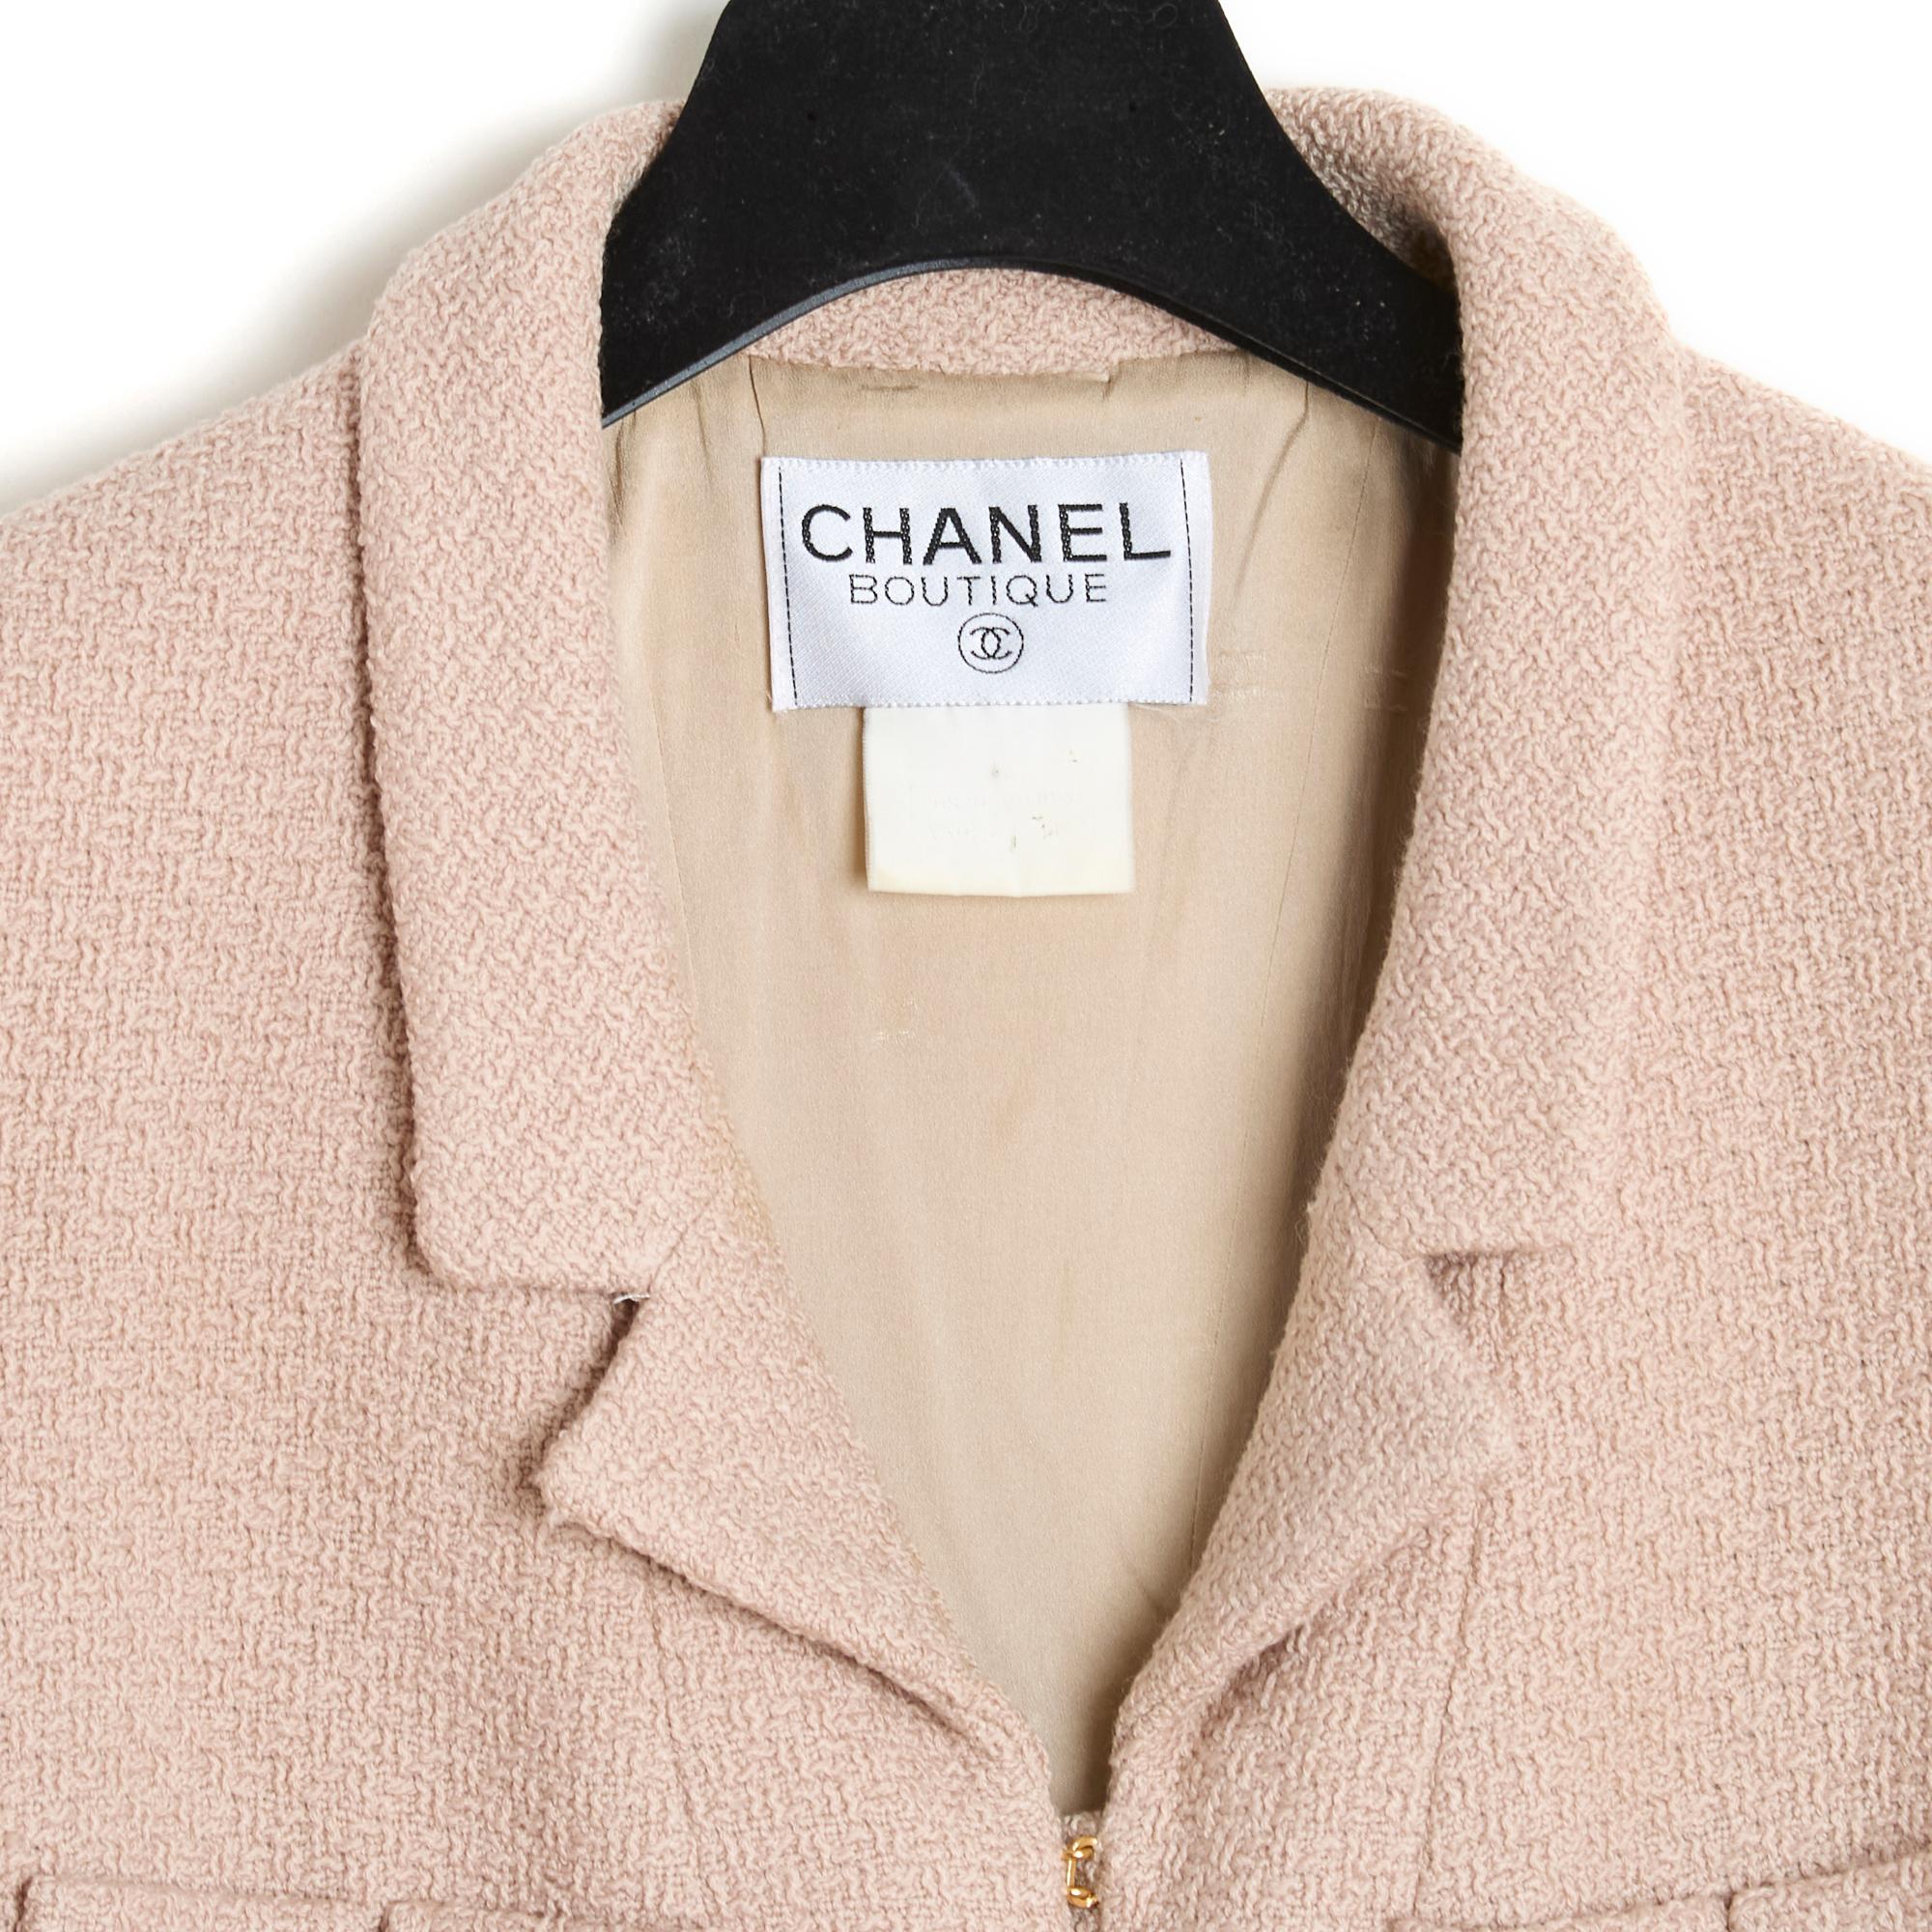 Chanel jacket from the Fall Winter 1998 collection in pink-beige wool, small notched collar closed in front with a series of 11 gold metal hooks, 4 patch pockets on the chest and hips, long sleeves closed with 3 CC logo buttons, silk lining